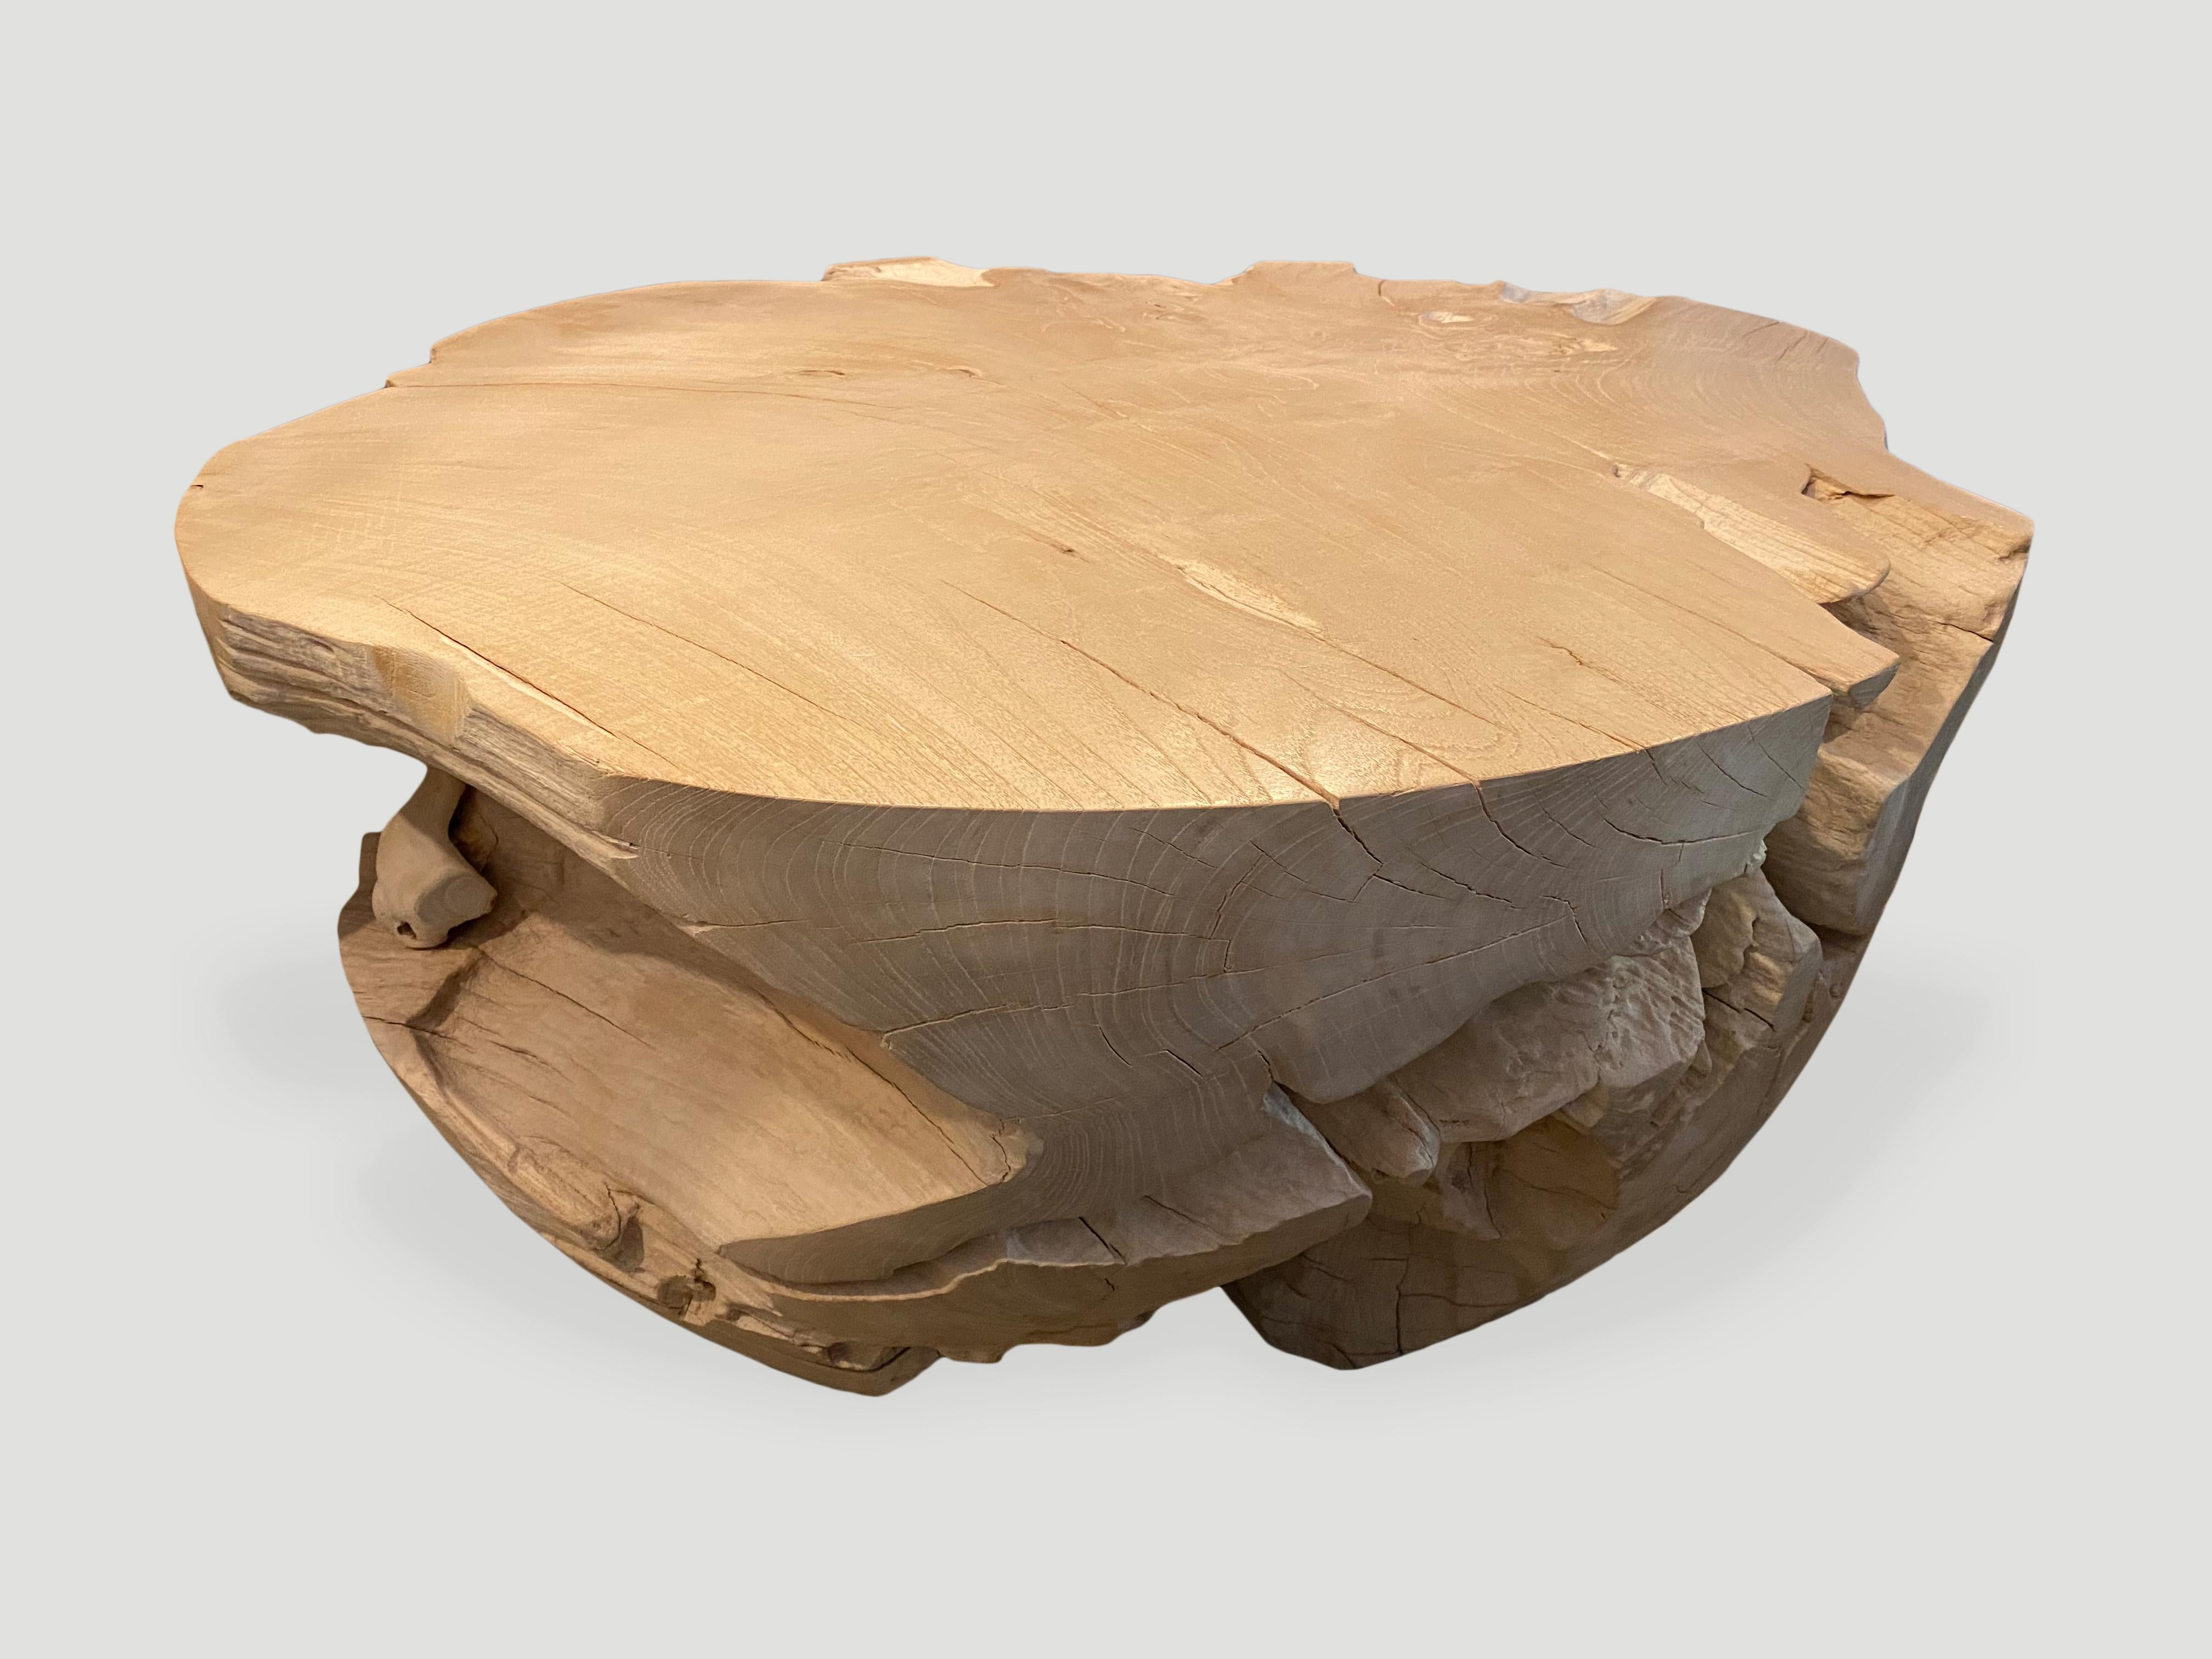 Andrianna Shamaris Impressive Bleached Teak Wood Coffee Table In Excellent Condition For Sale In New York, NY